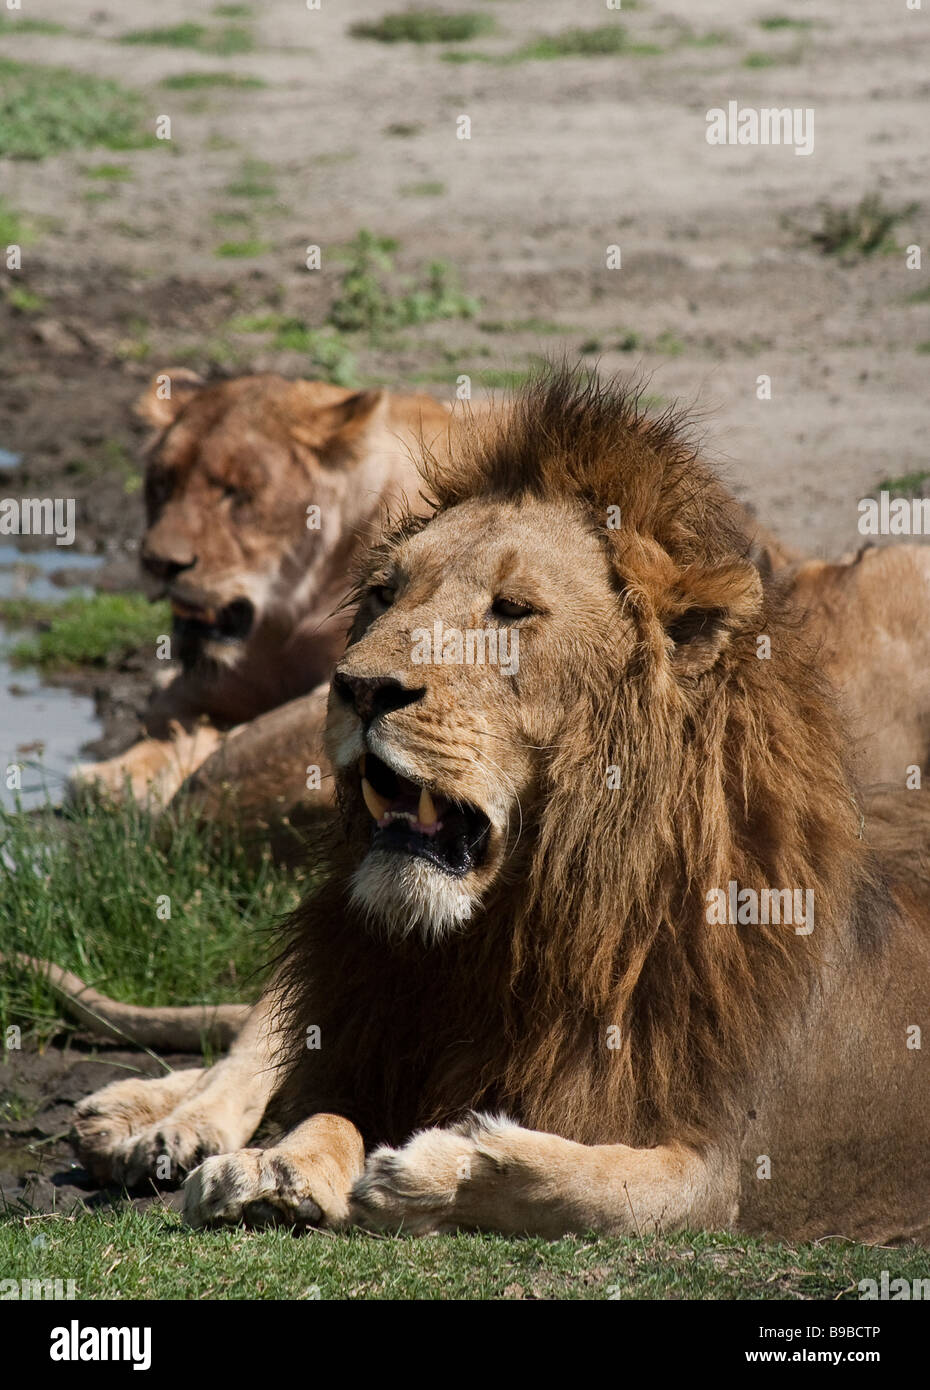 Lions resting by a watering hole Stock Photo